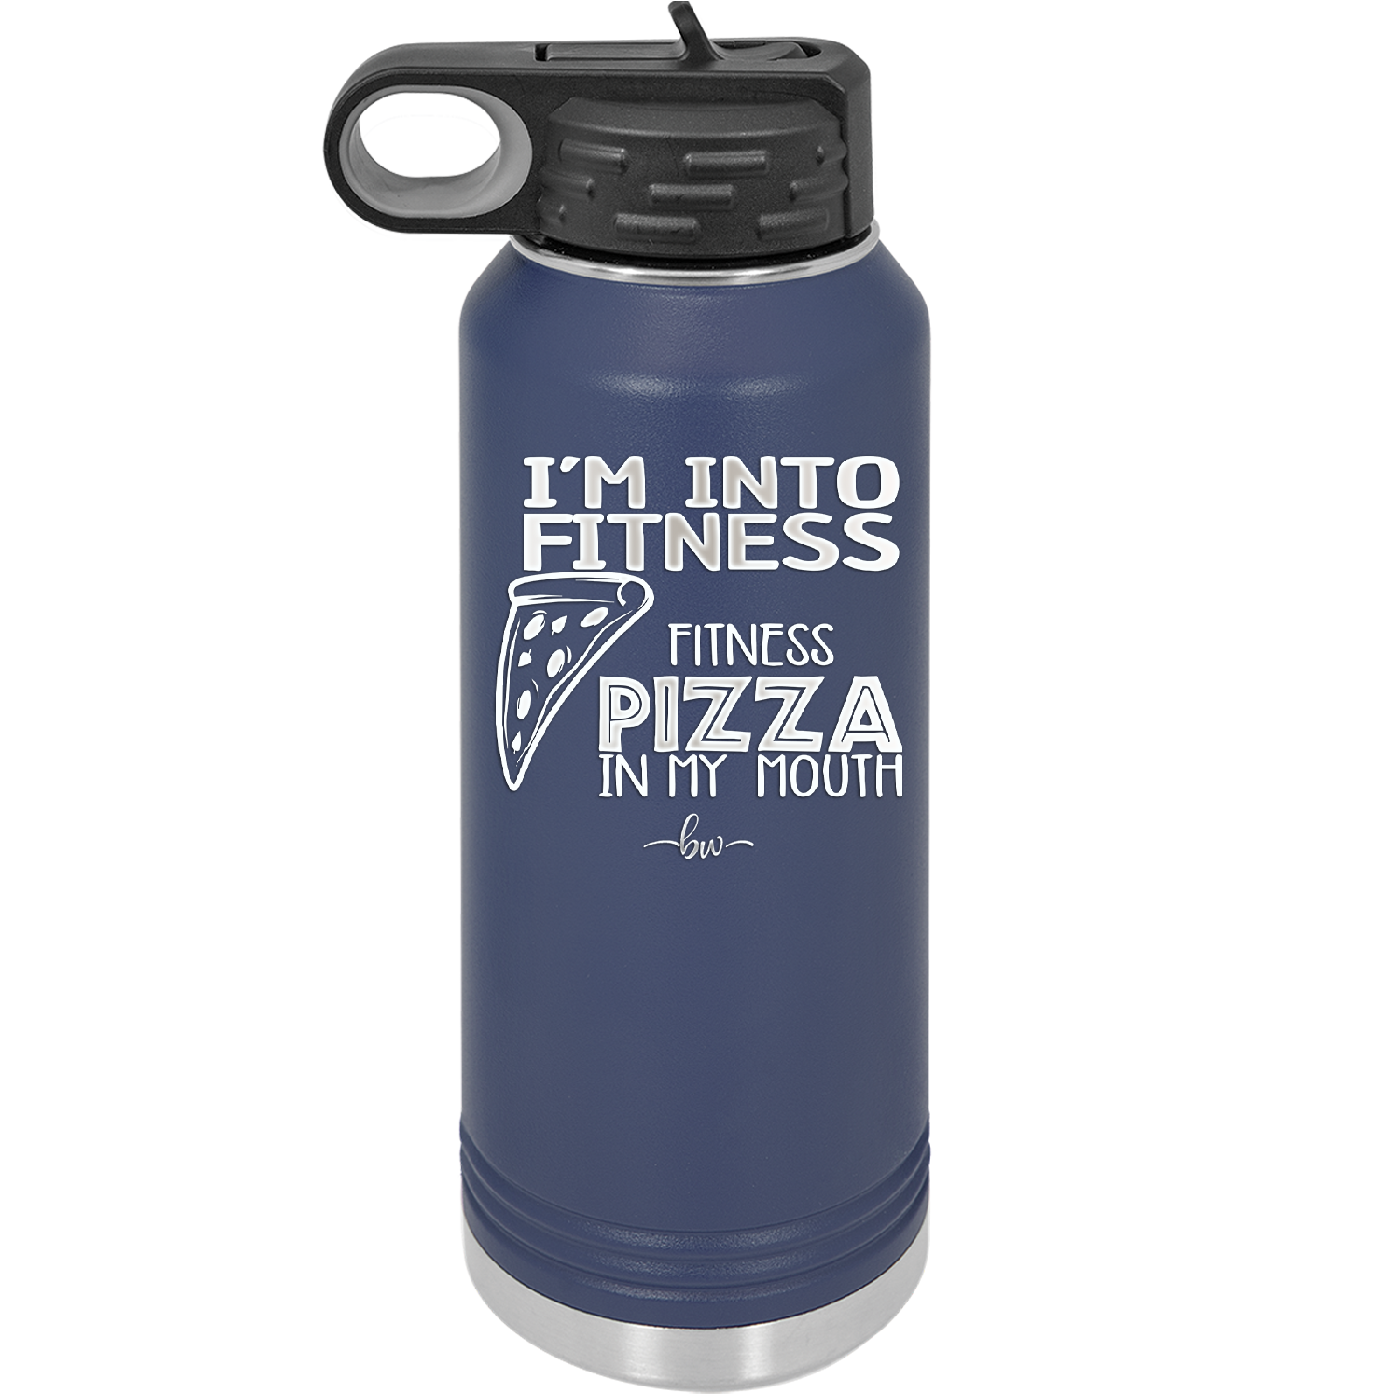 I'm into Fitness Fitness Pizza into My Mouth - Laser Engraved Stainless Steel Drinkware - 2135 -